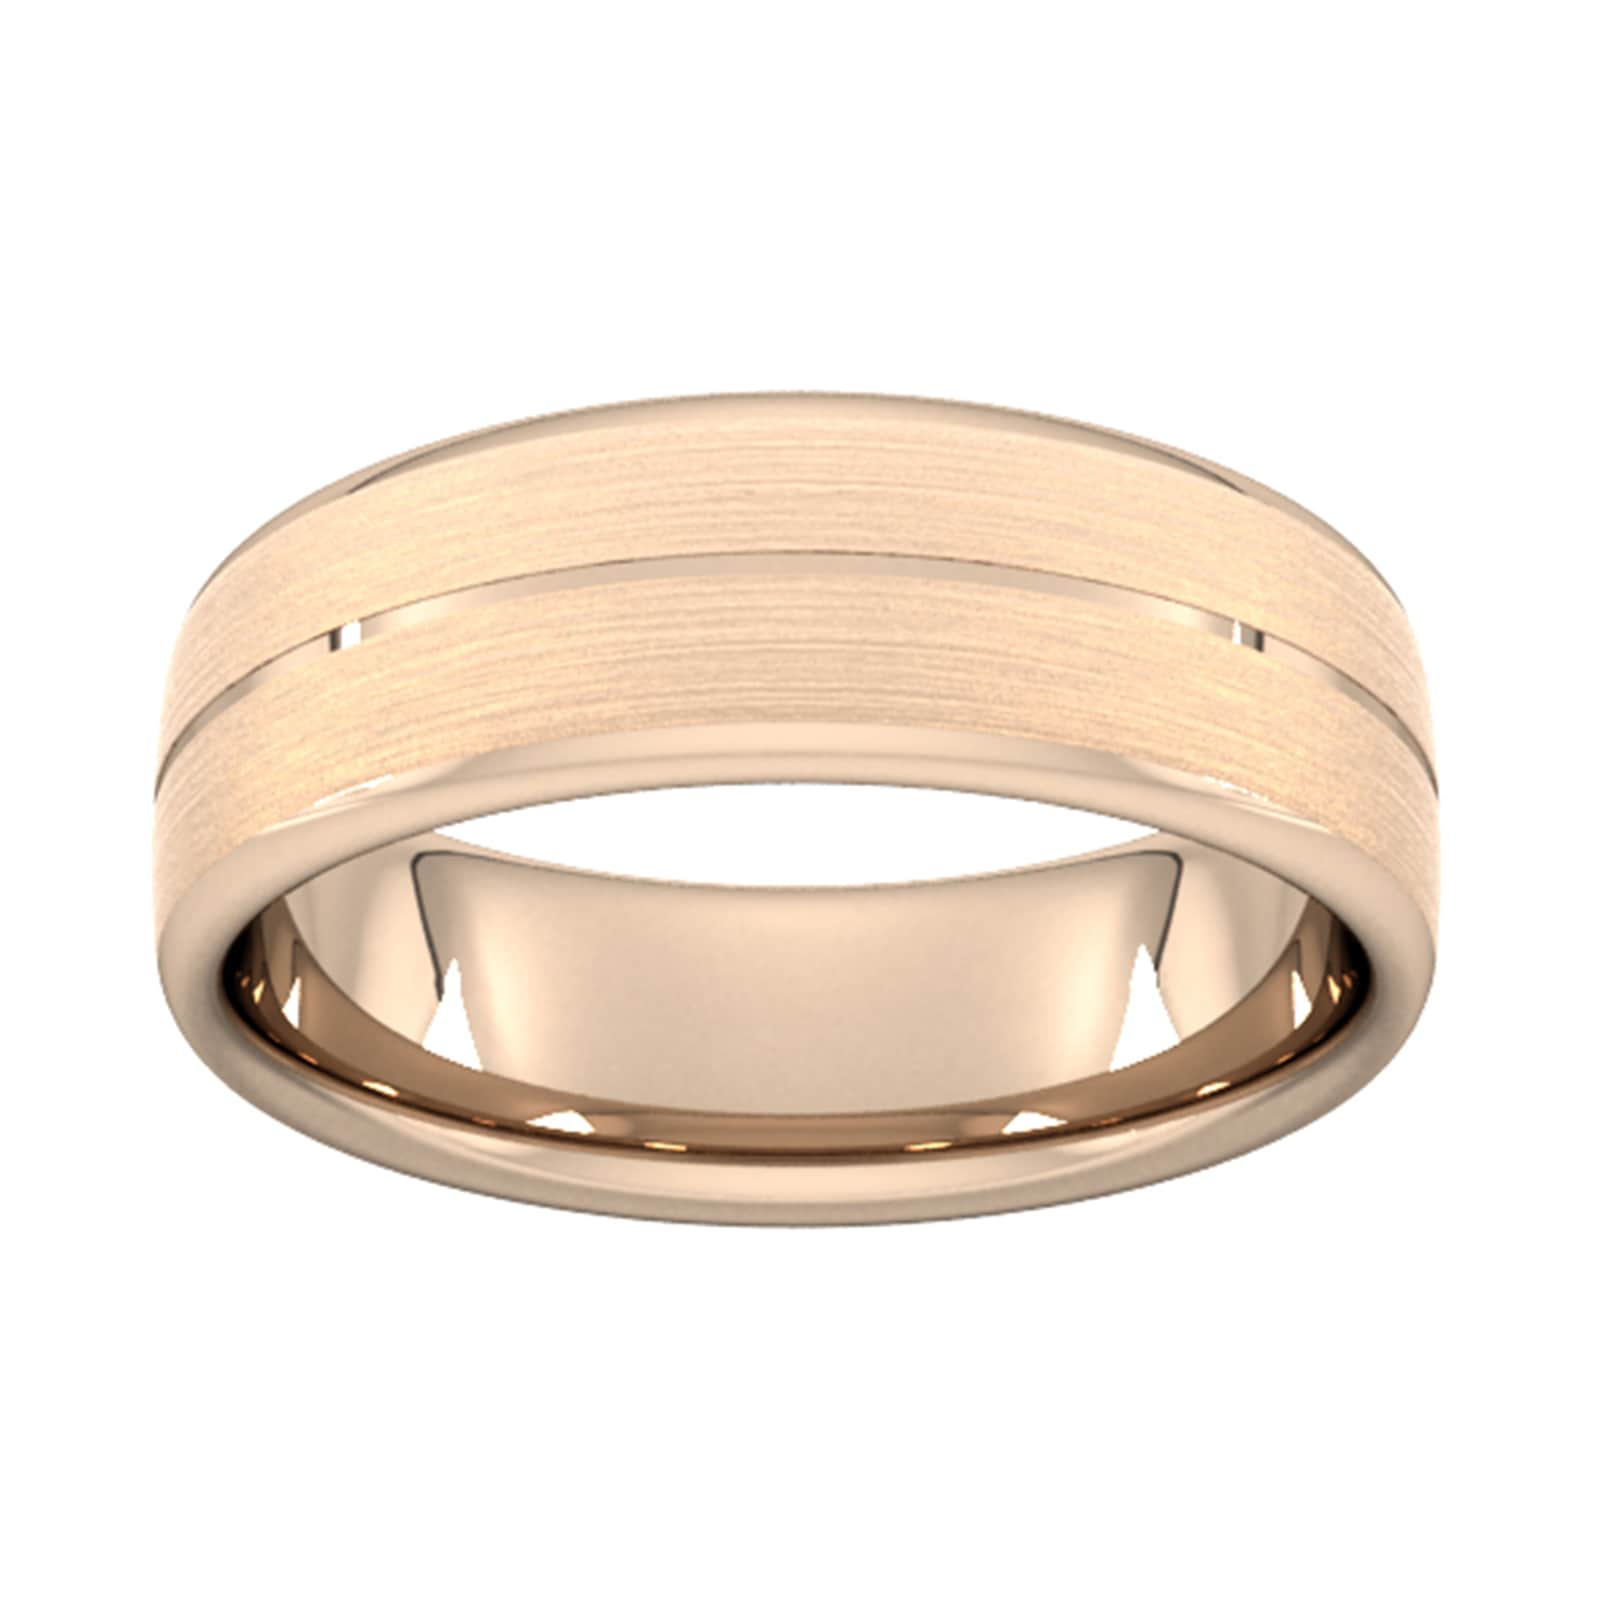 7mm D Shape Standard Centre Groove With Chamfered Edge Wedding Ring In 9 Carat Rose Gold - Ring Size K